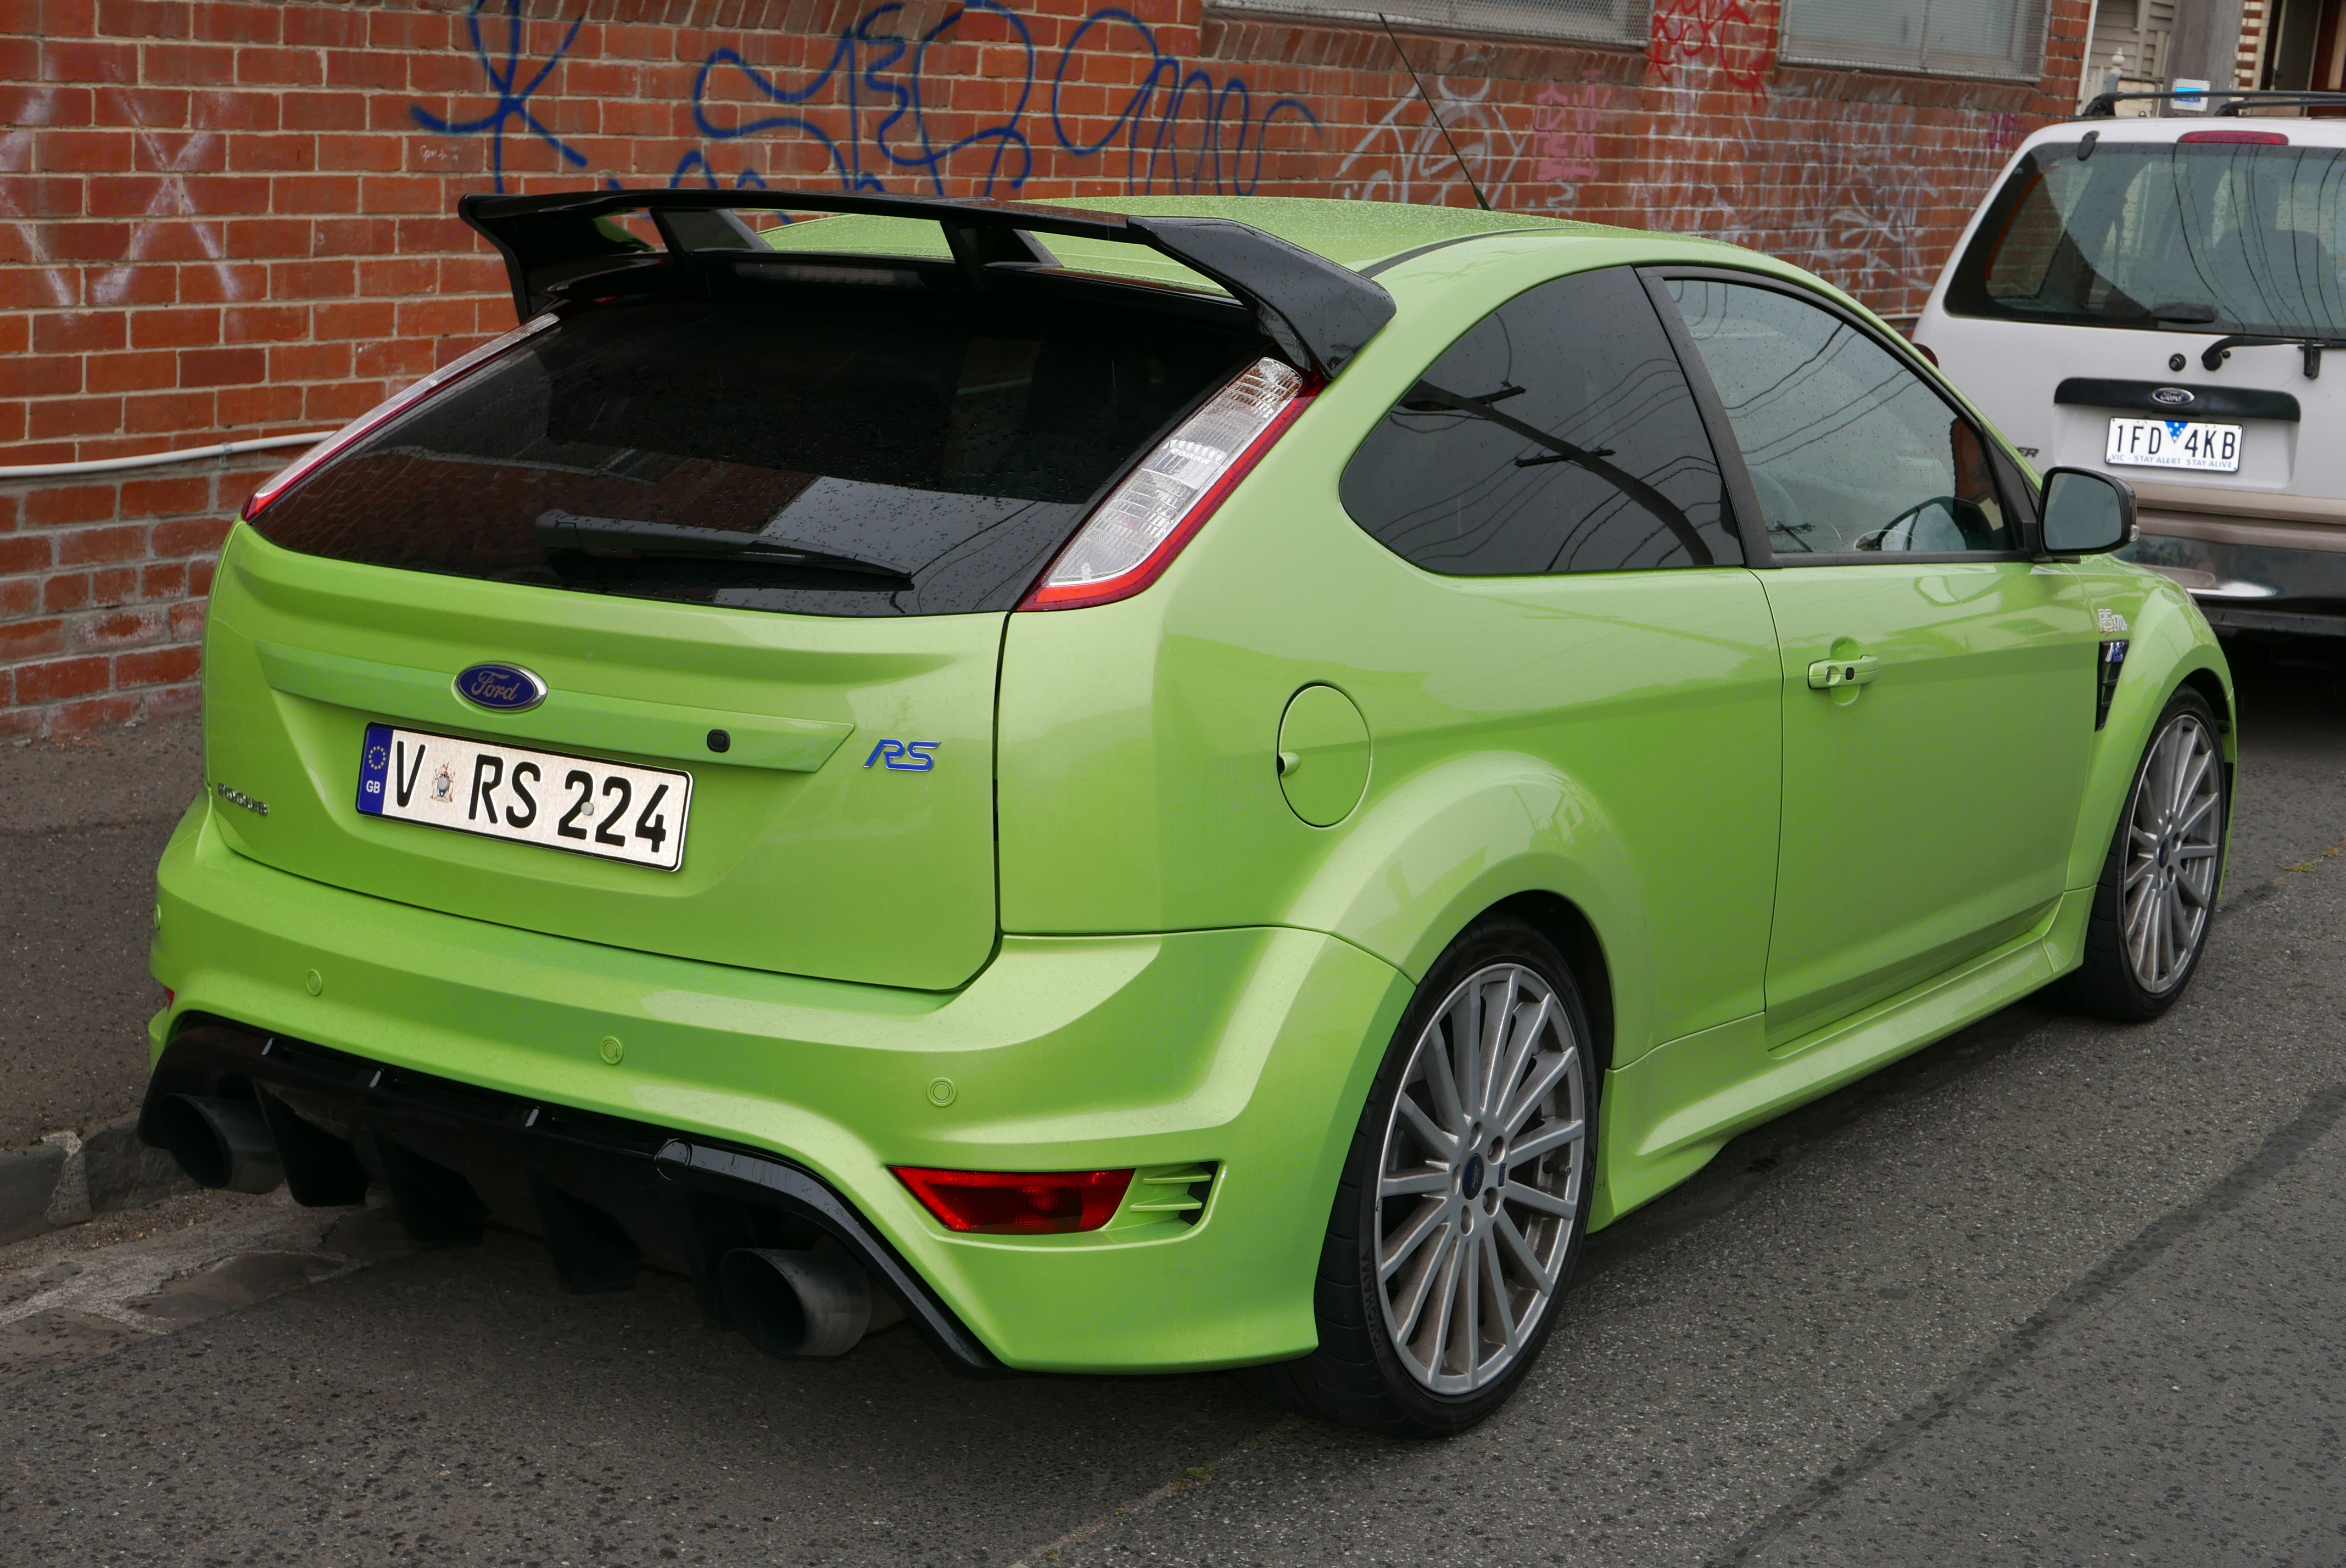 Special tuning. Форд фокус 2 RS. Форд фокус 2 РС. Ford Focus RS 2010. Ford Focus RS mk2.